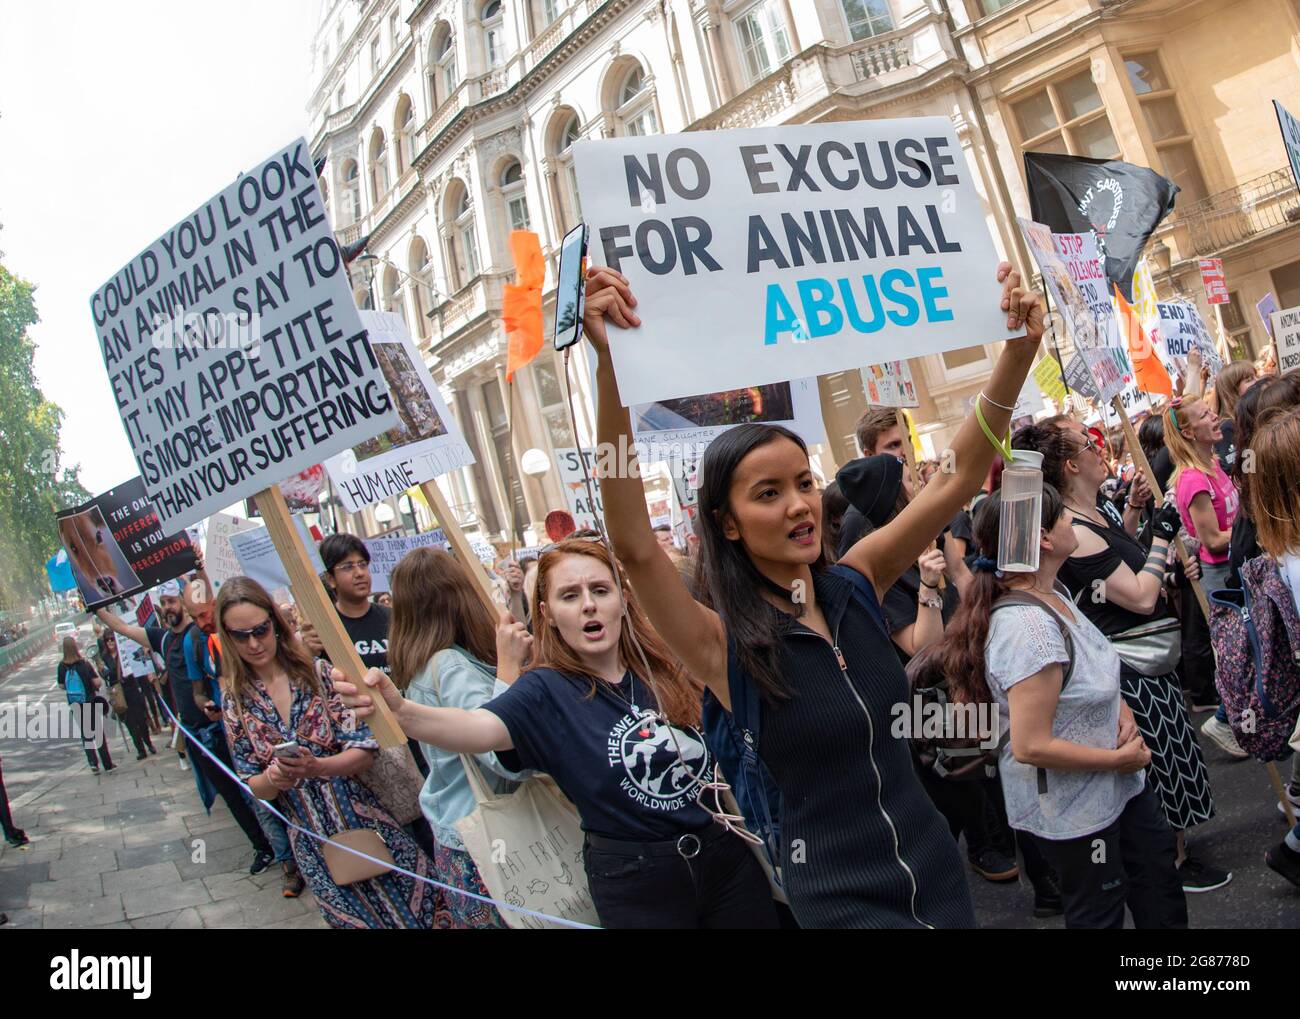 The Official Animal Rights March London 2019.  Activists marching through UK’s capital city on 17th August 2019. No Excuse for Animal Abuse. Stock Photo